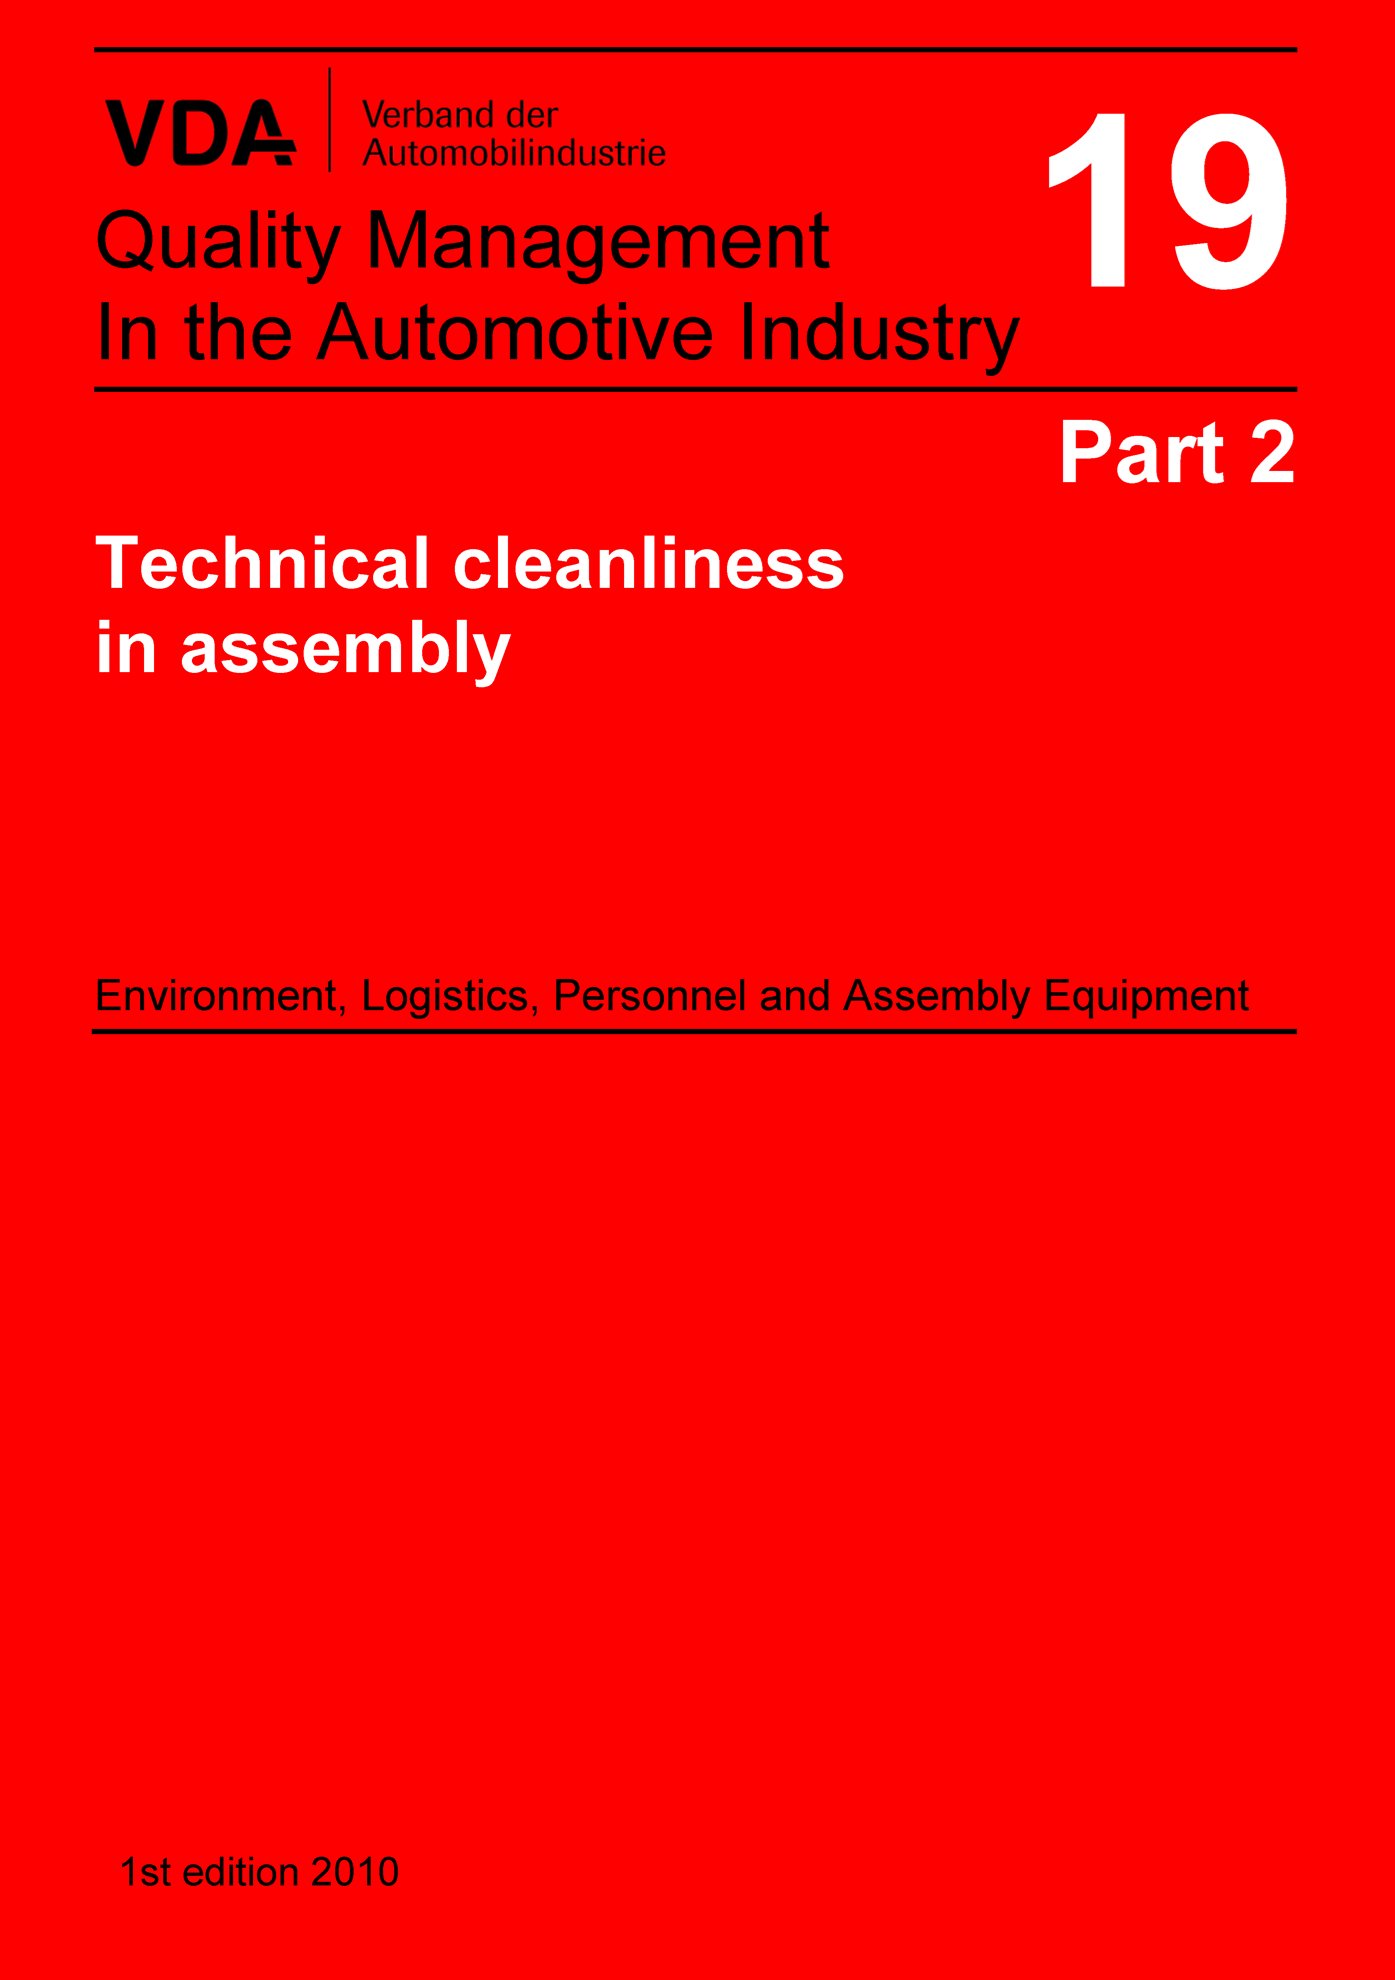 Publikation  VDA Volume 19 Part 2, Technical cleanliness in assembly - Environment, Logistics, Personnel and Assembly Equipment - 1st edition 2010 1.1.2010 Ansicht